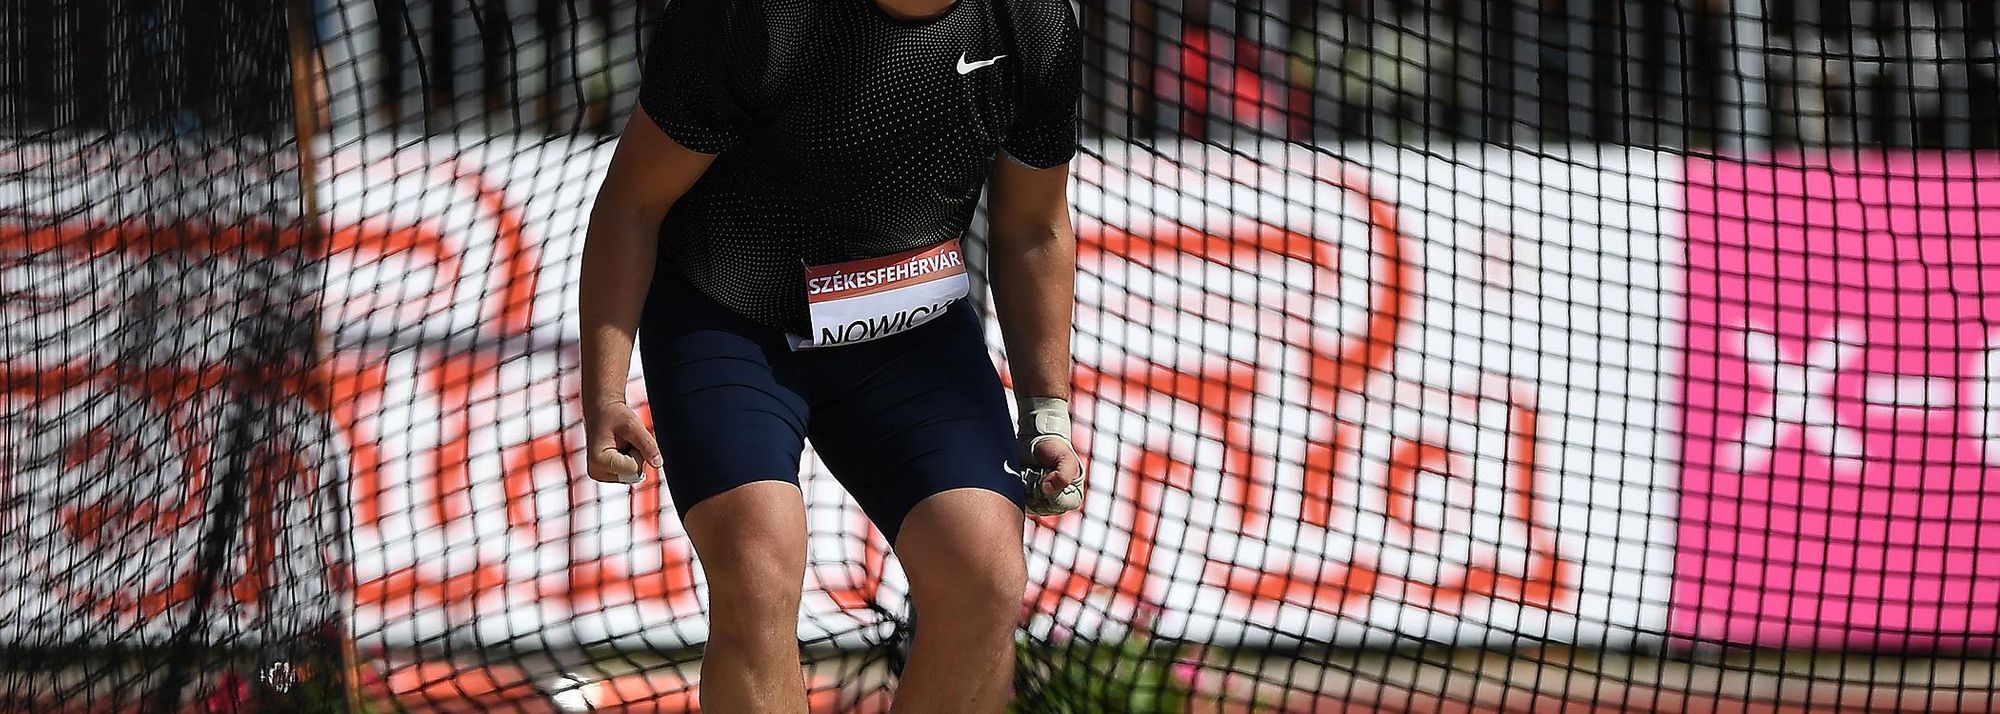 Making their first IAAF Hammer Throw Challenge appearance of 2019, Polish duo Wojceich Nowicki and Pawel Fajdek produced the highlight of the inaugural Irena Szewinska Memorial in Bydgoszcz on Wednesday (12).